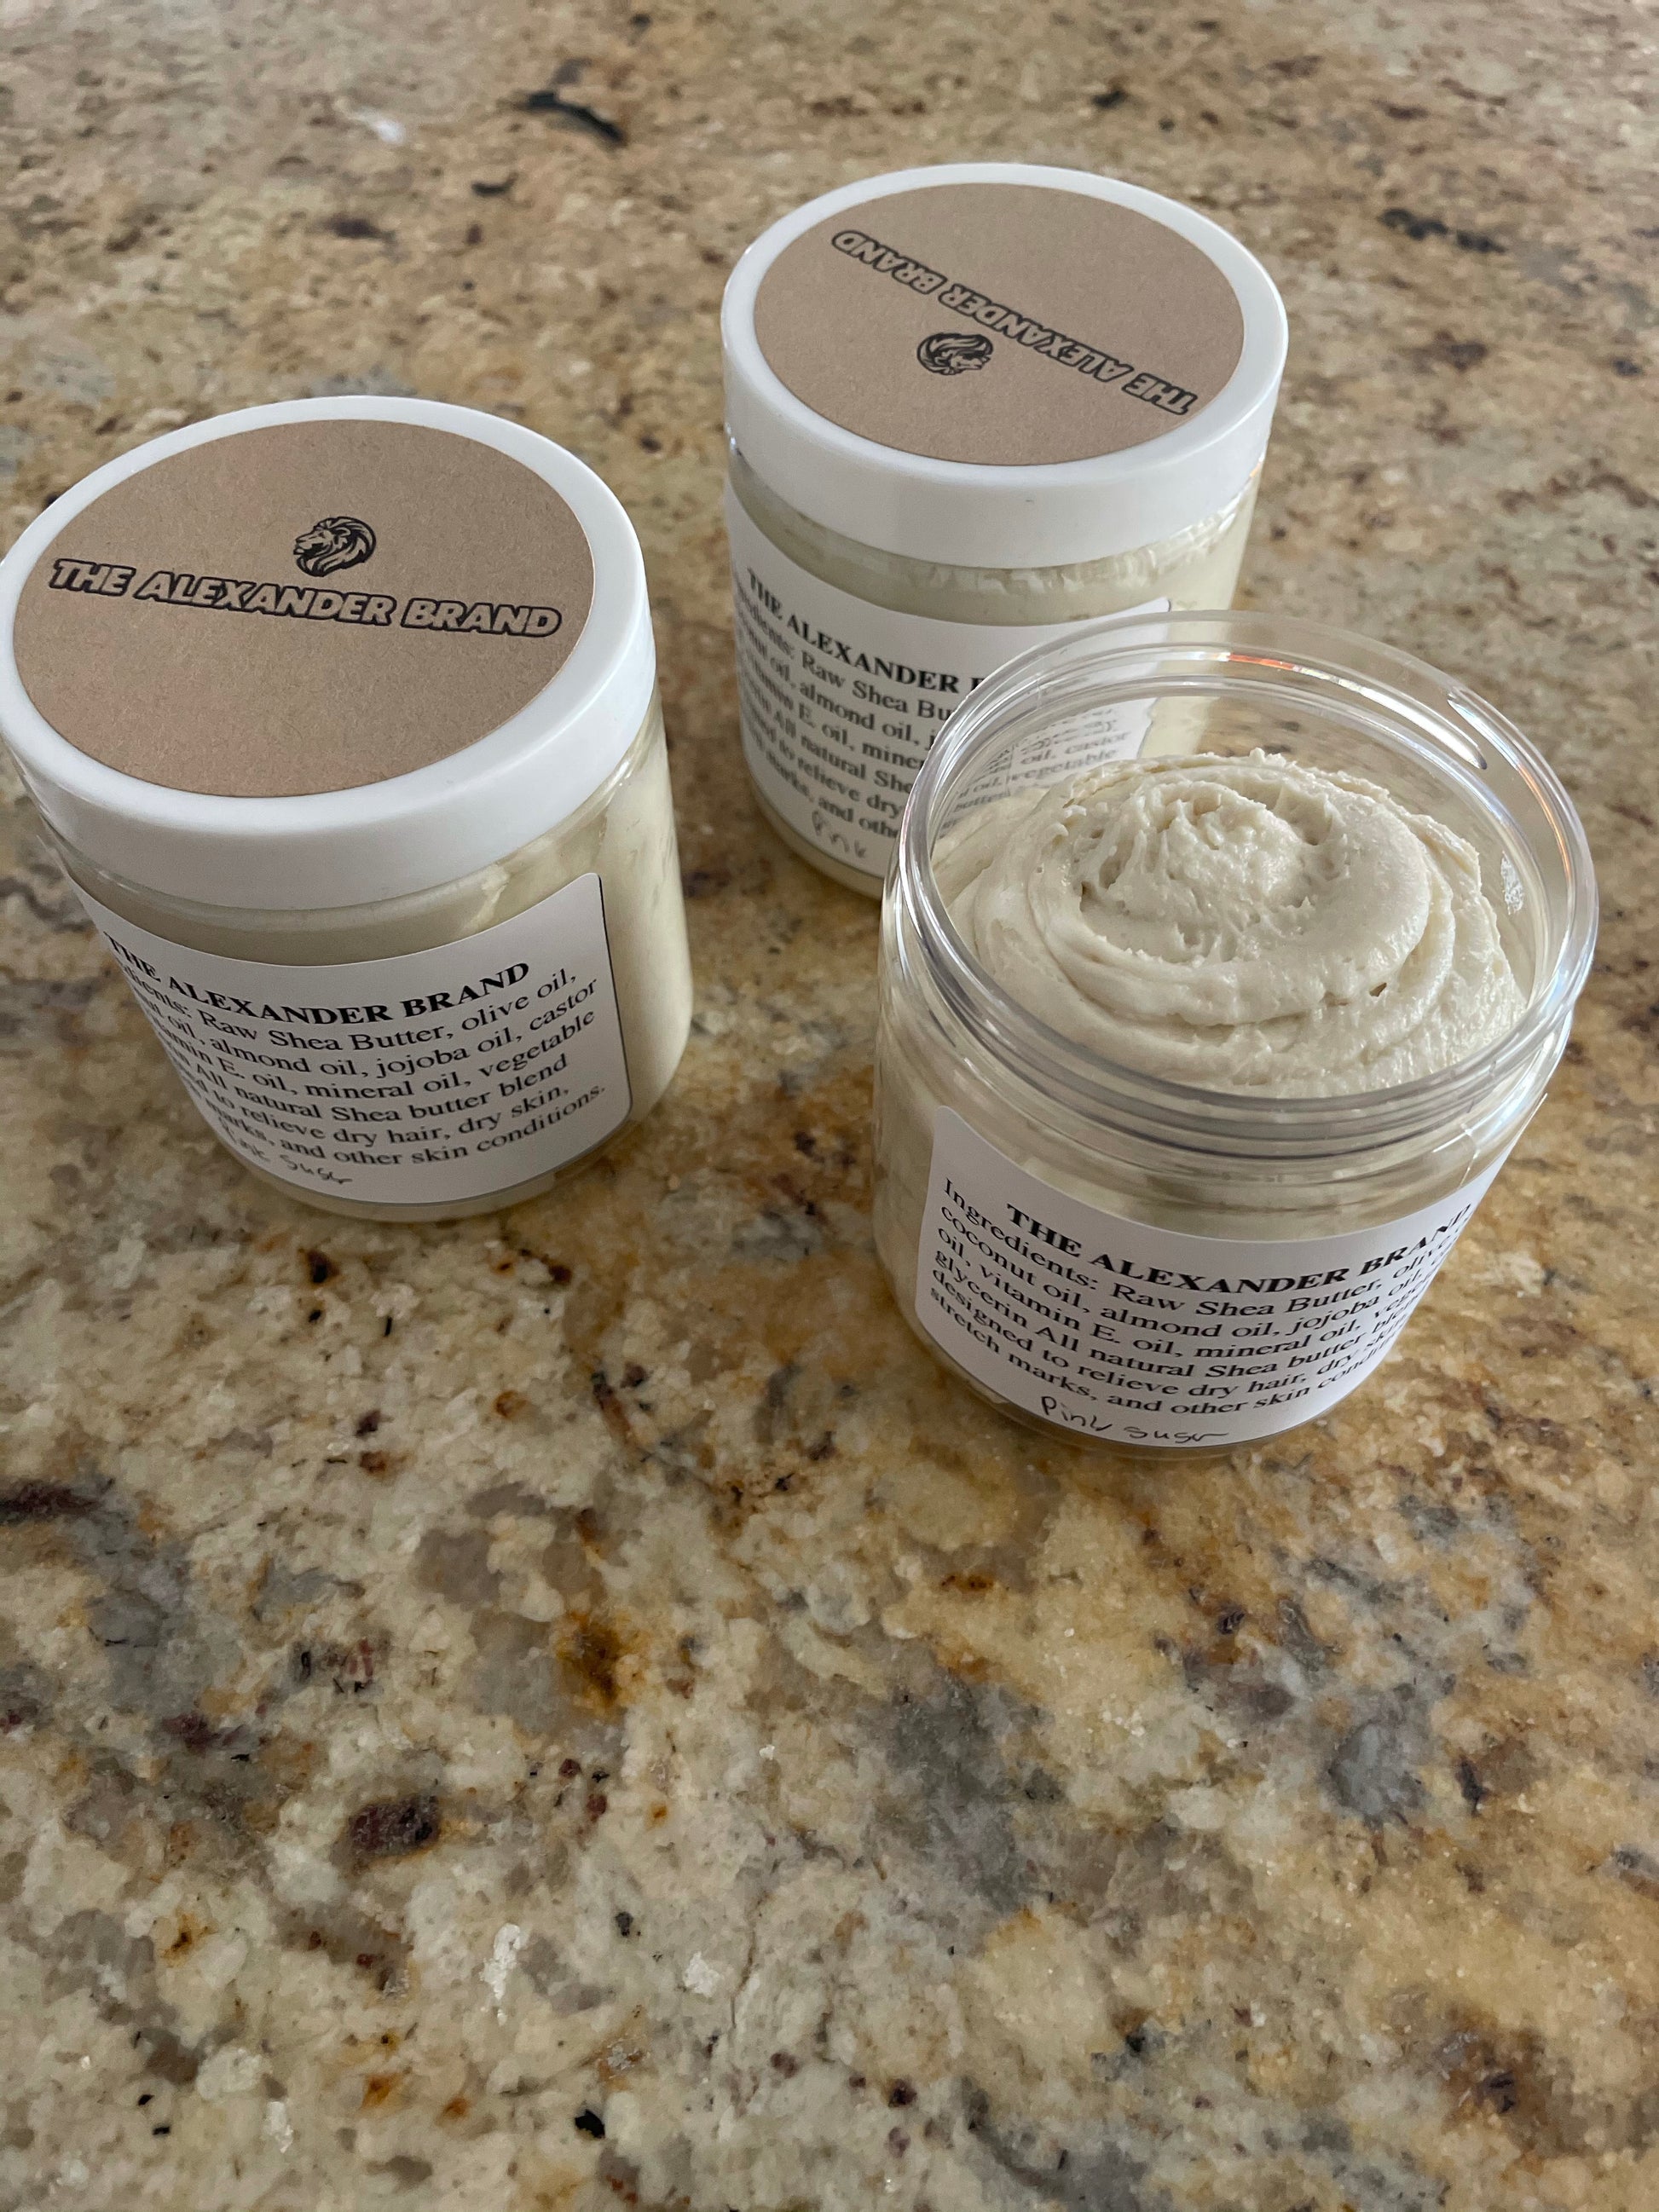 Whipped Shea Butter Lotion - The Alexander Brand 